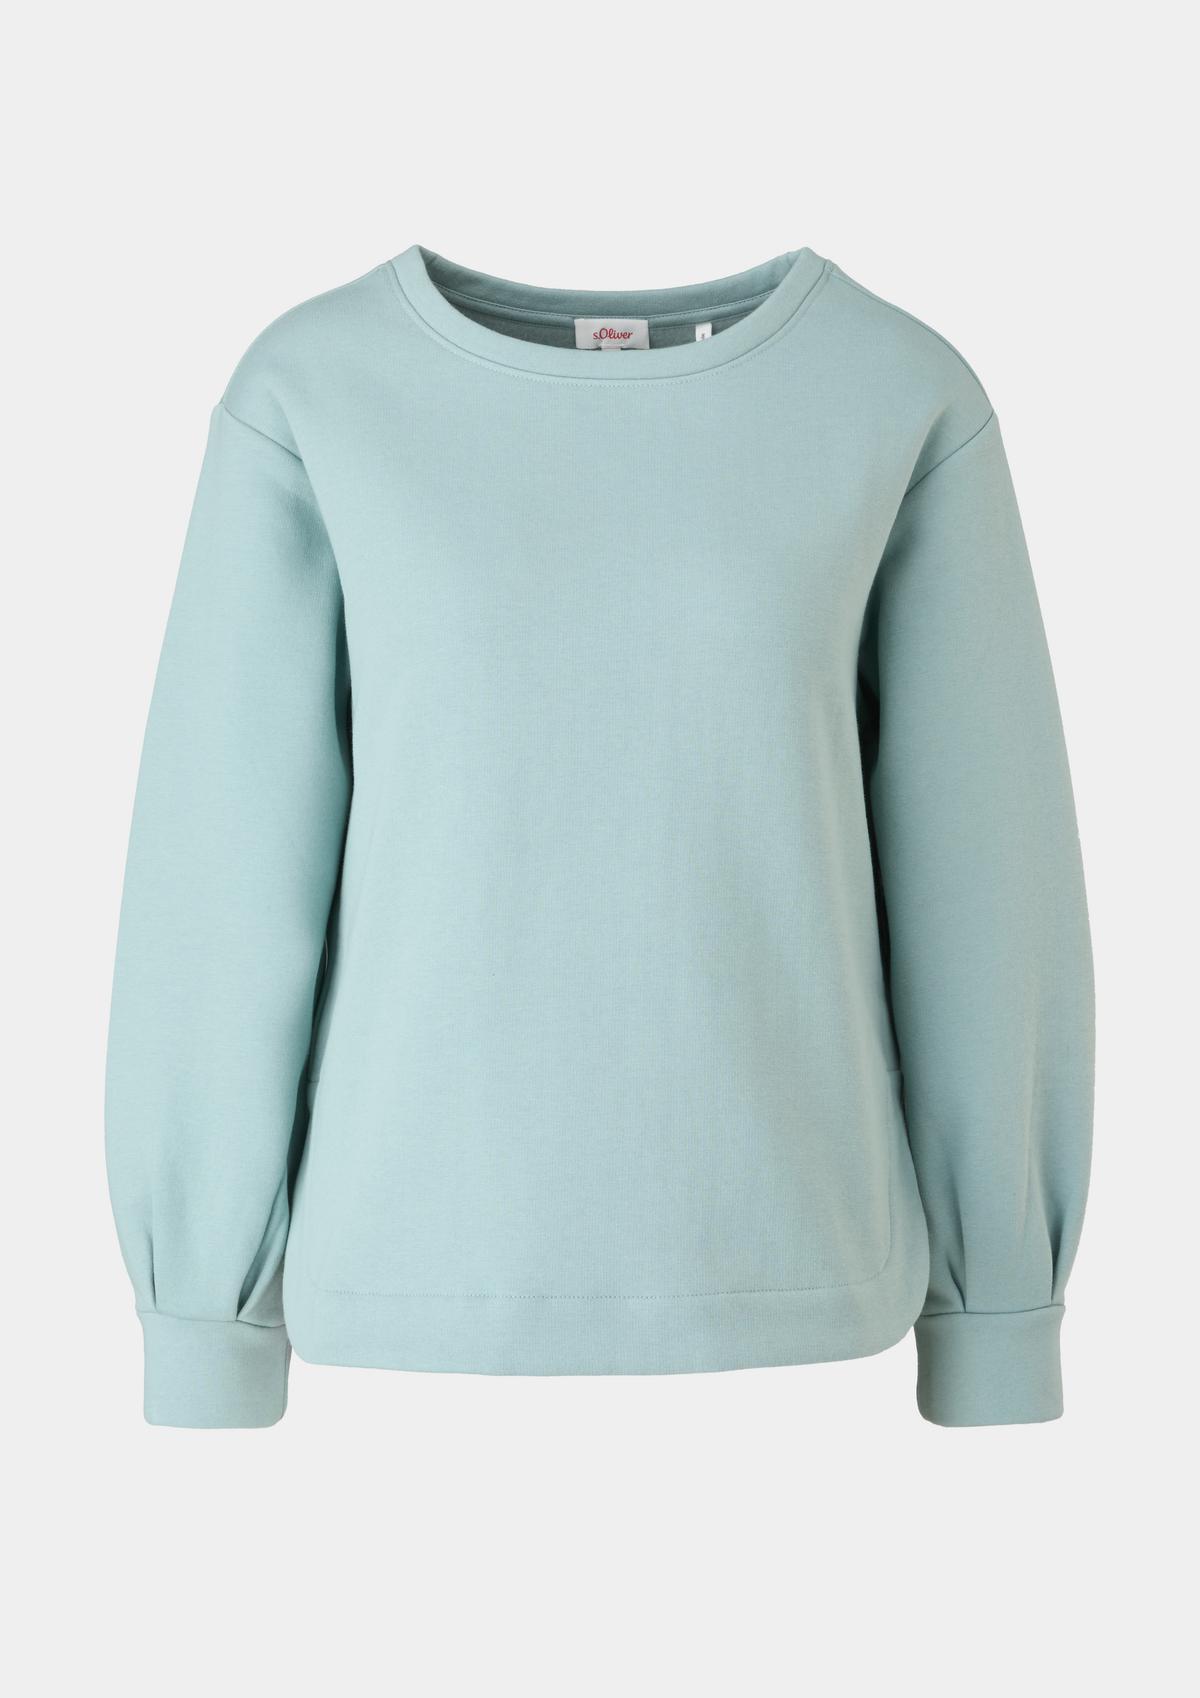 s.Oliver Sweatshirt with a rounded hem